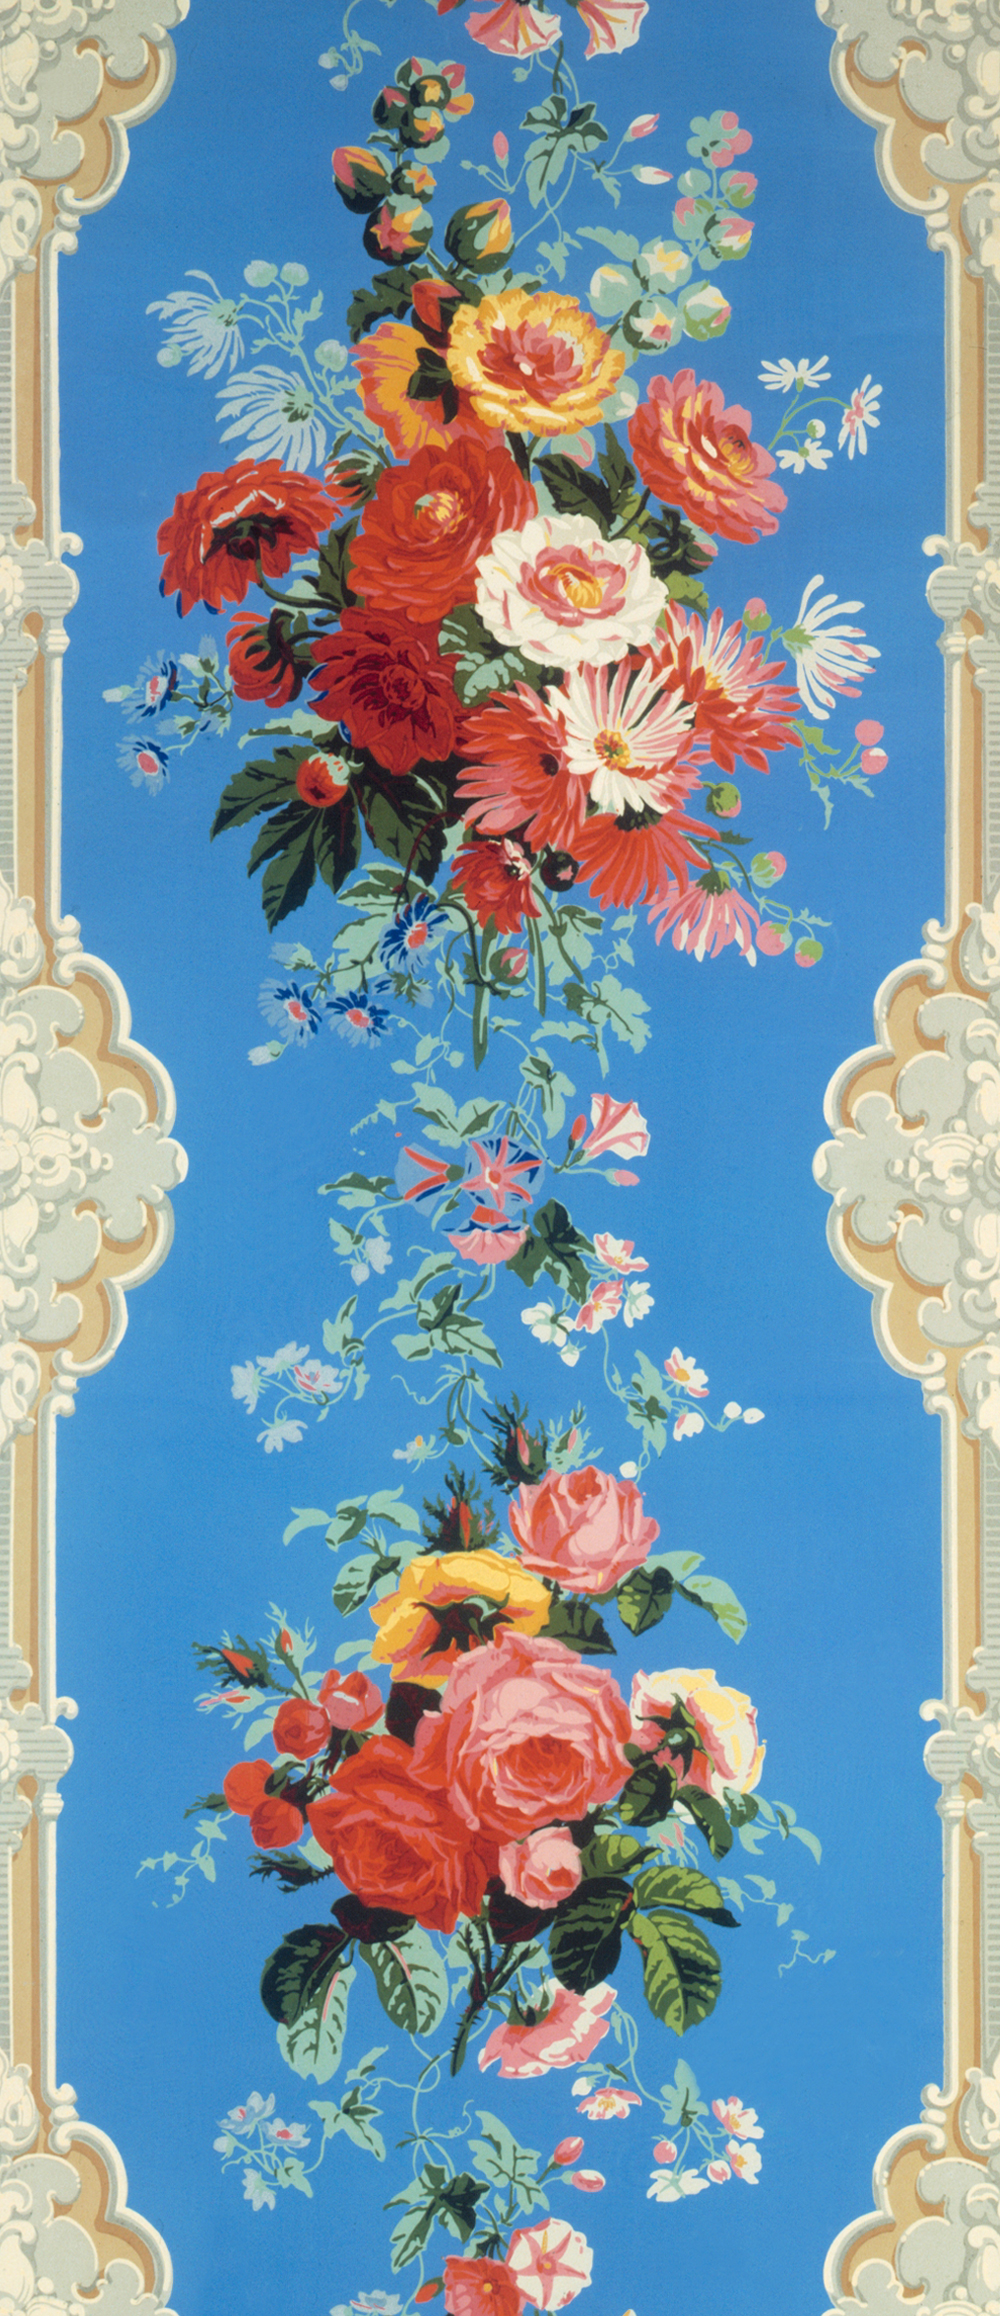 Wallpaper Framed By Rococo Pilaster Motifs About Museum No